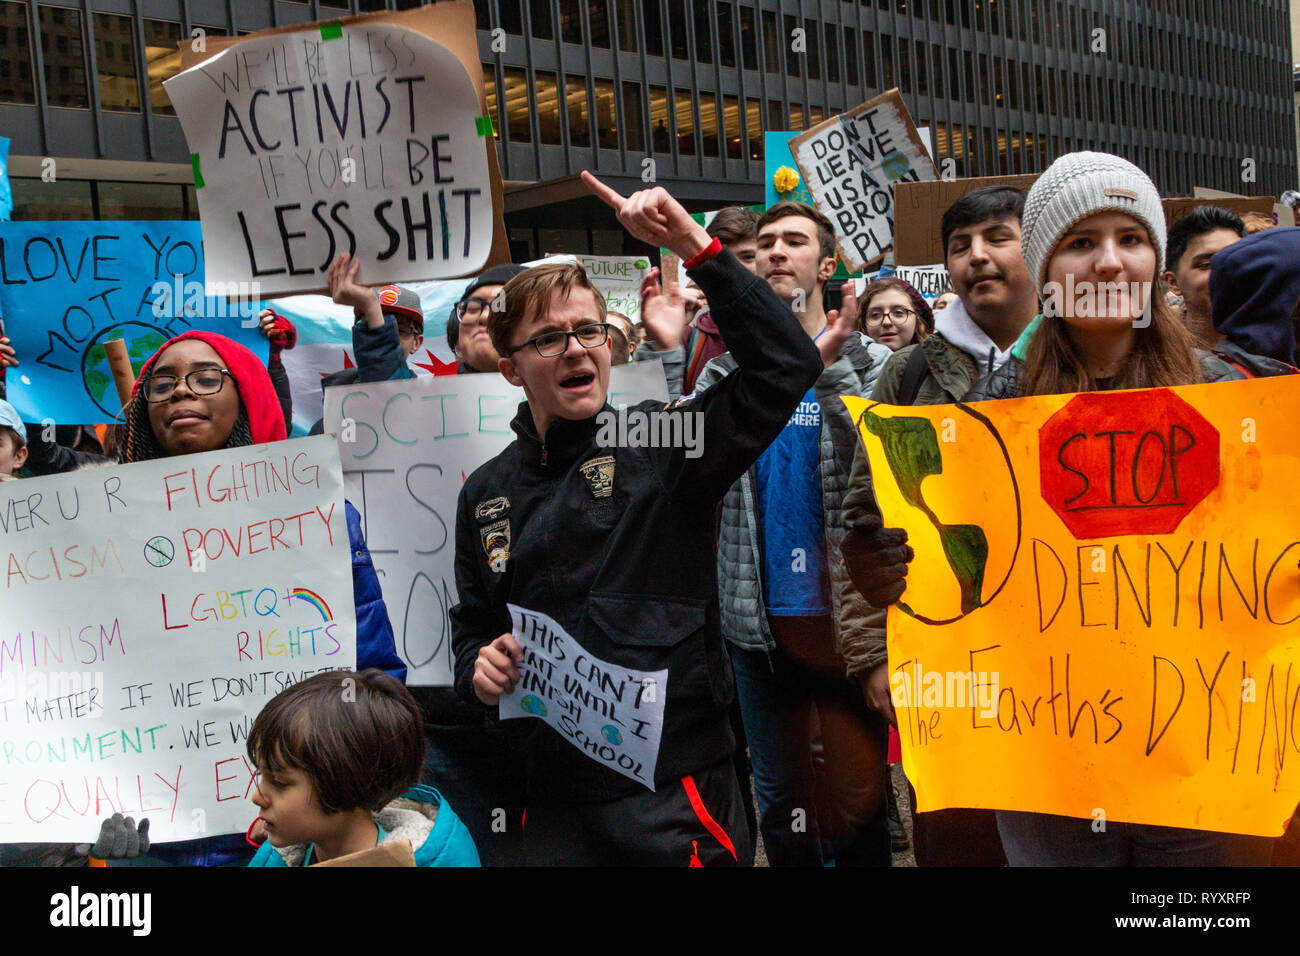 Chicago, USA. 15th Mar, 2019. As part of the world wide 'Youth Climate Strike' a spirited group of Chicago area young folks left their schools this morning, gathered near the Field Museum and marched through Grant Park to Federal Plaza in the loop, chanting their commitment to ending the threat of climate change. In the plaza, young speakers, mostly students from area high schools, exhorted the crowd to hold the government accountable by 'registering to vote, showing up at the polls, and voting them out'  if elected officials deny that climate change is a threat. Credit: Matthew Kaplan/Alamy L Stock Photo